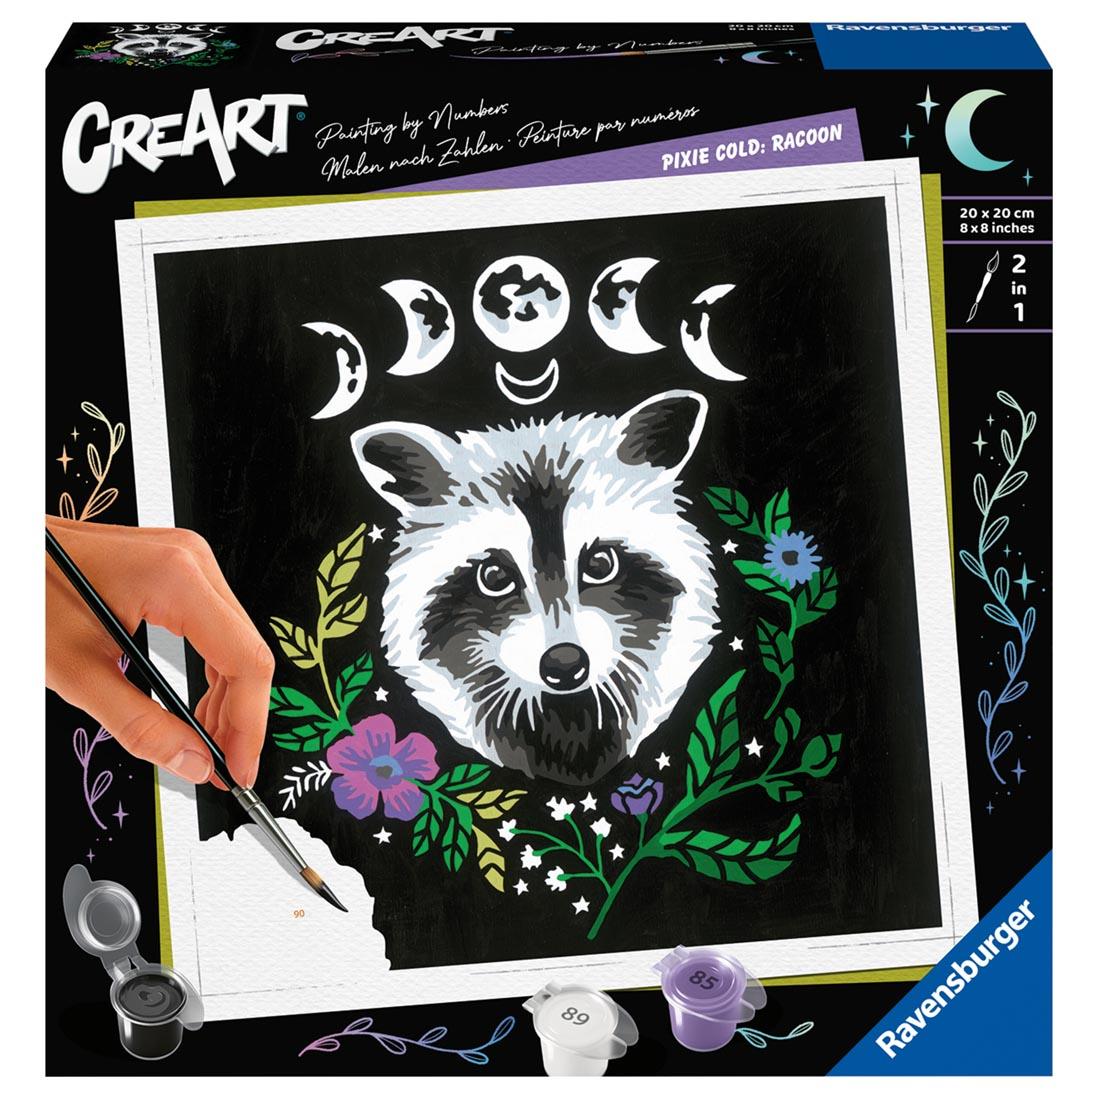 Pixie Cold: Raccoon Adult Paint By Number Set By Ravensburger